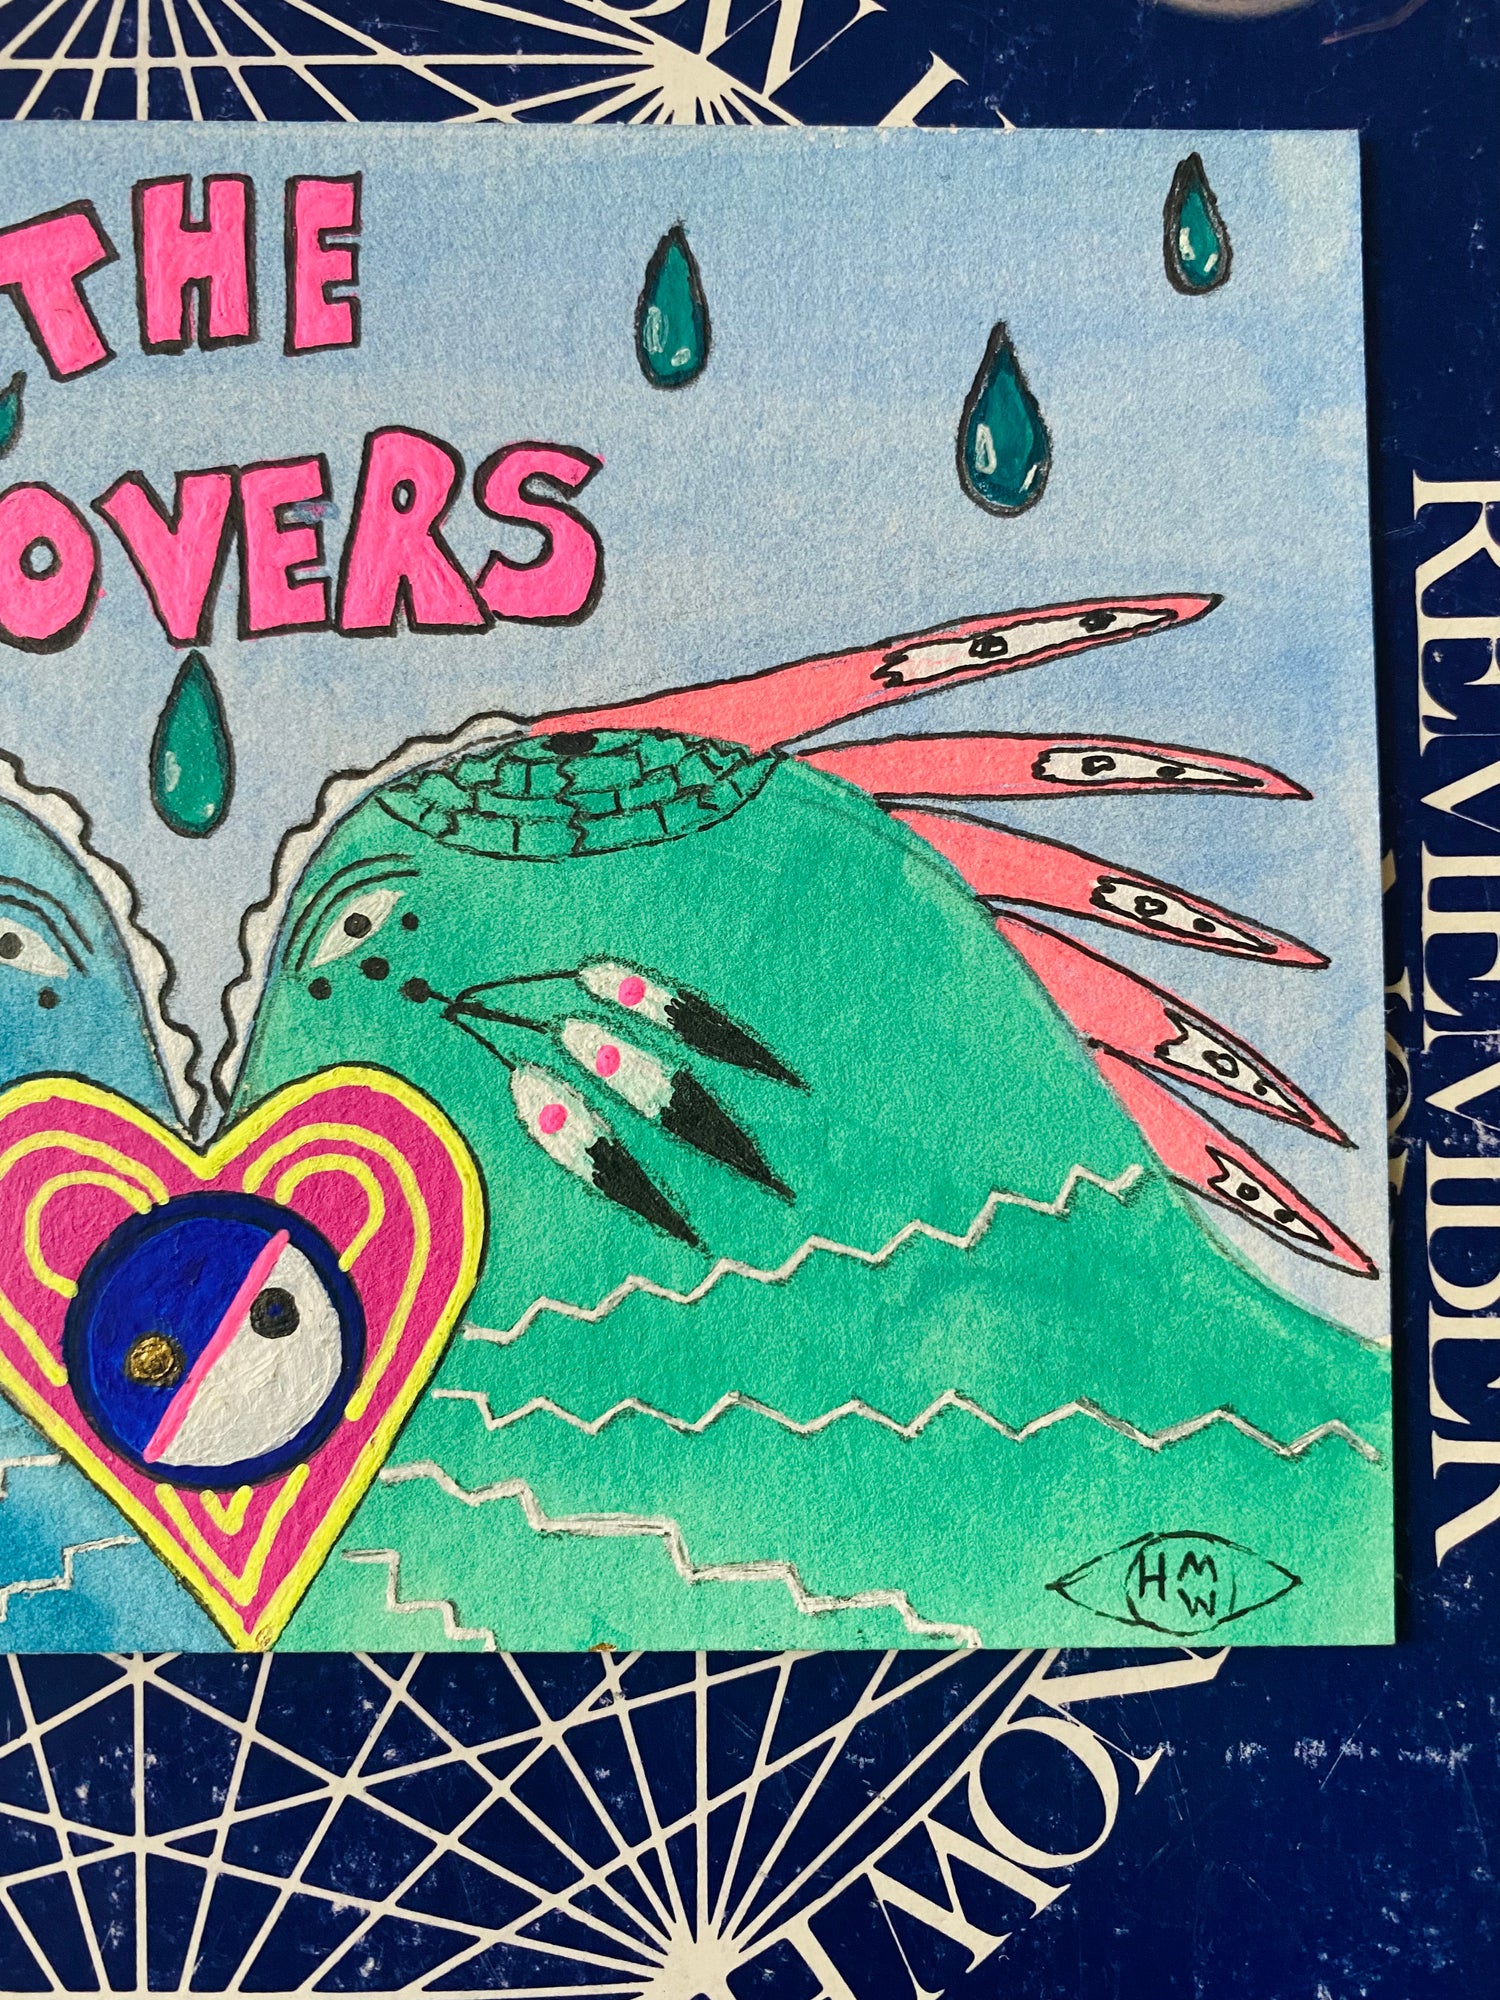 The Lovers-555 Original 4x6 - Moon Room Shop and Wellness